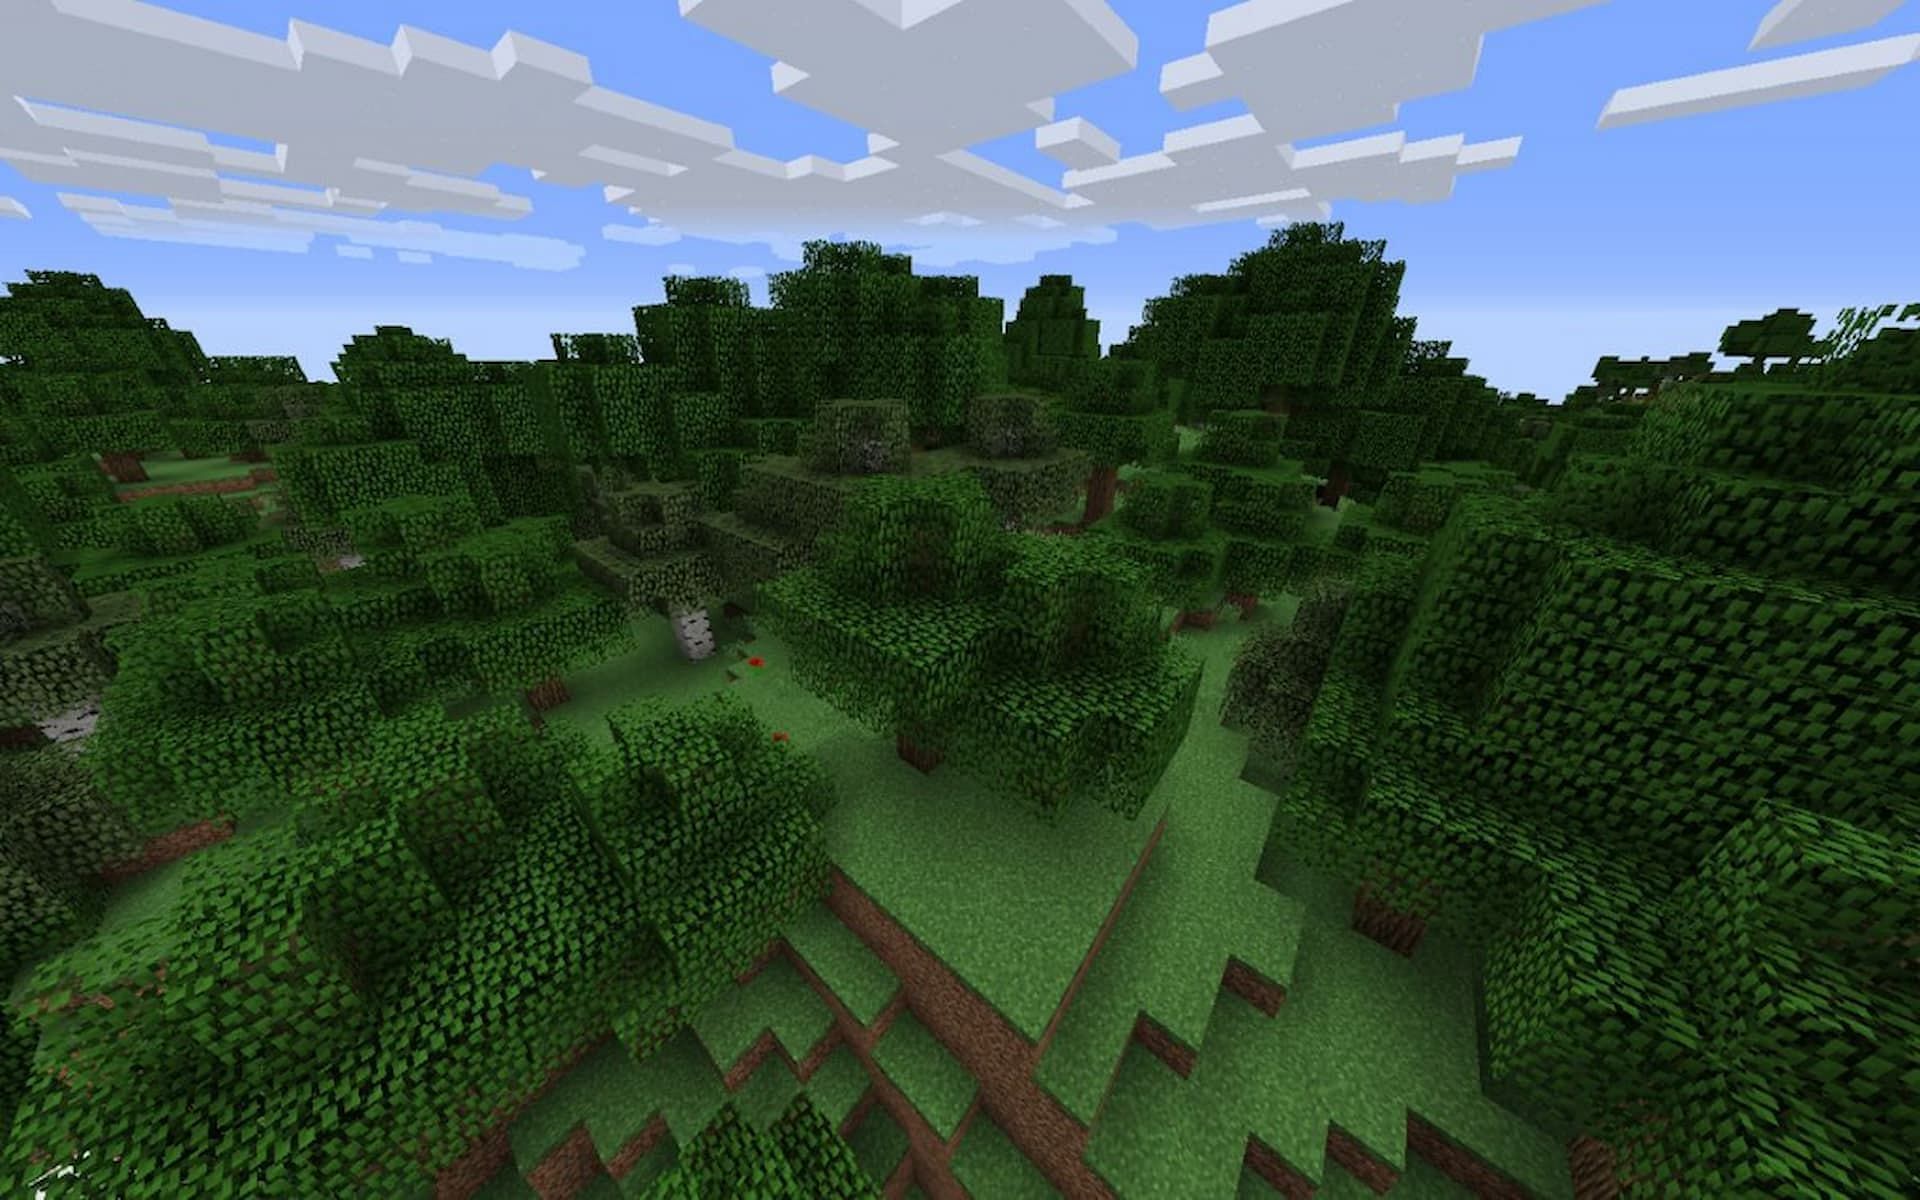 Biomes offer many different resources in Minecraft (Image via minecraft.net)